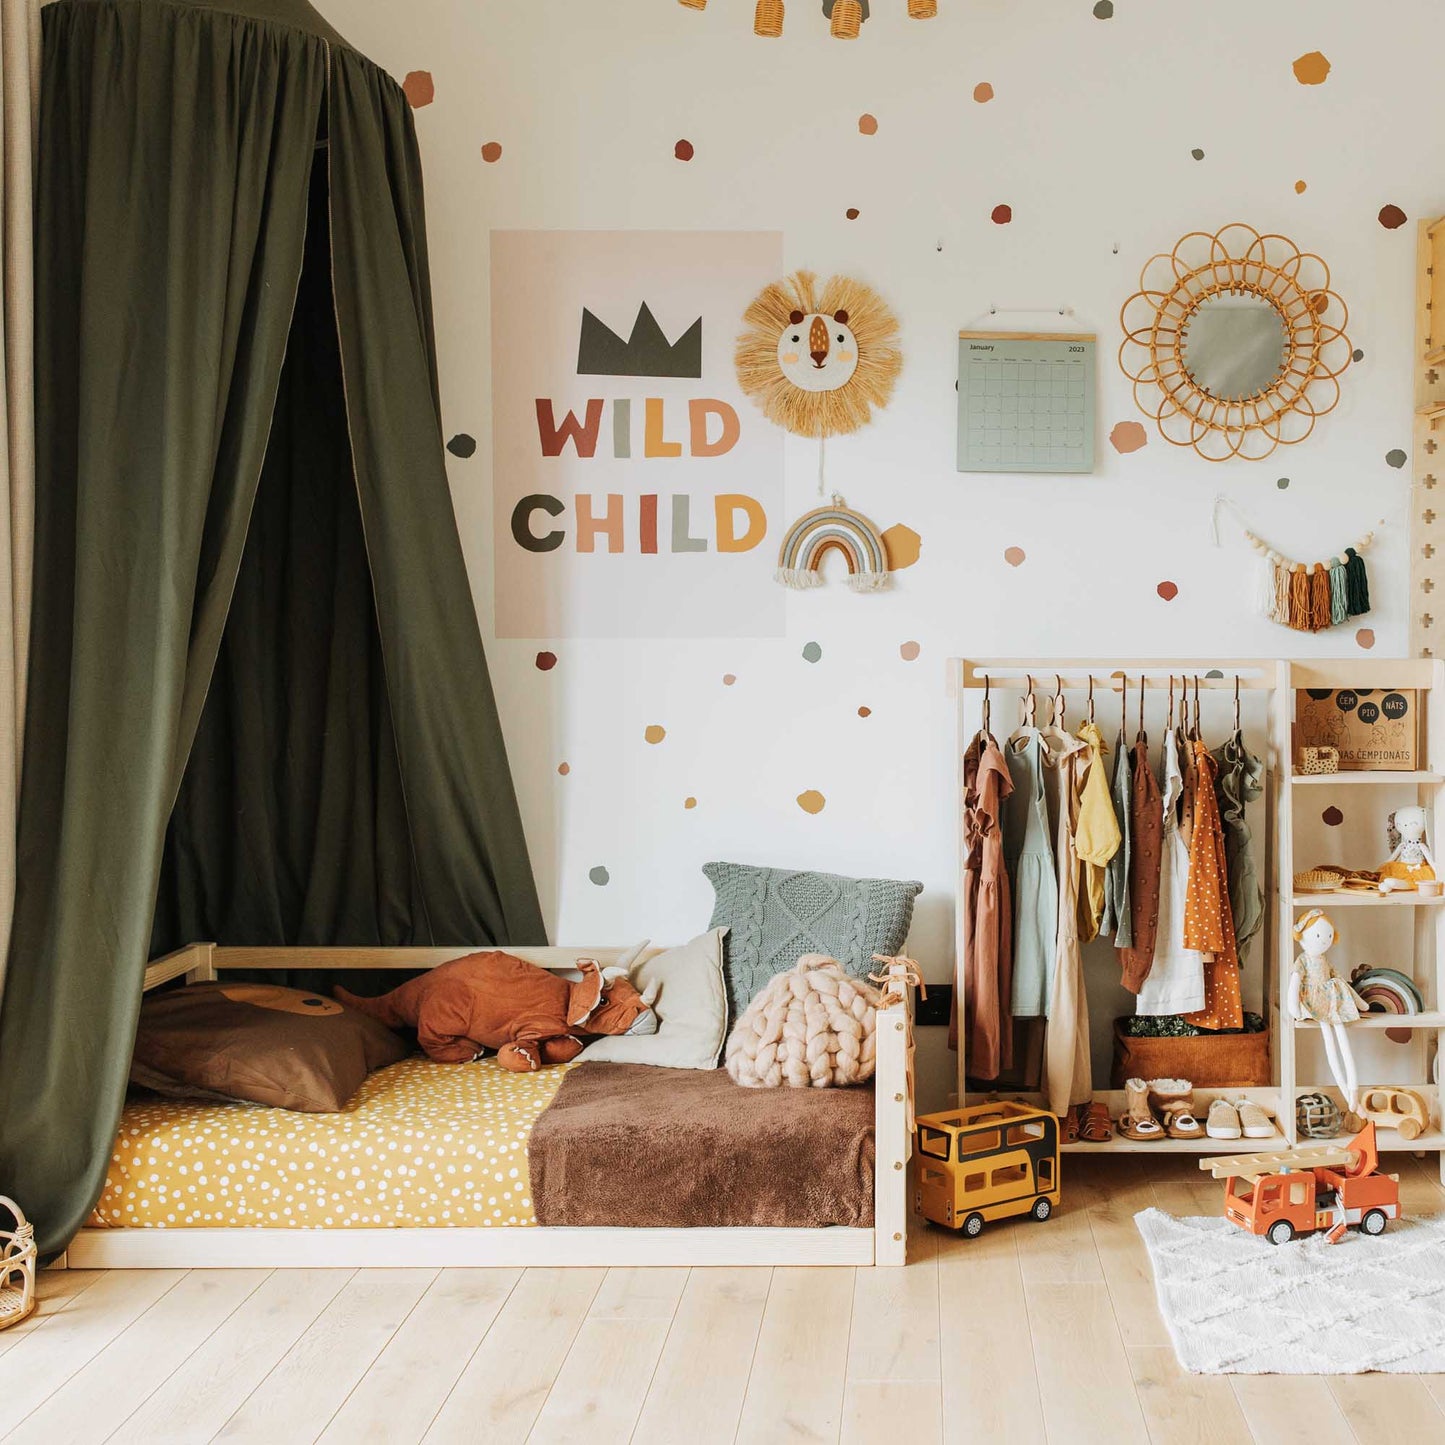 A Sweet Home From Wood 2-in-1 transformable kids' bed with a 3-sided horizontal rail featuring a canopy.